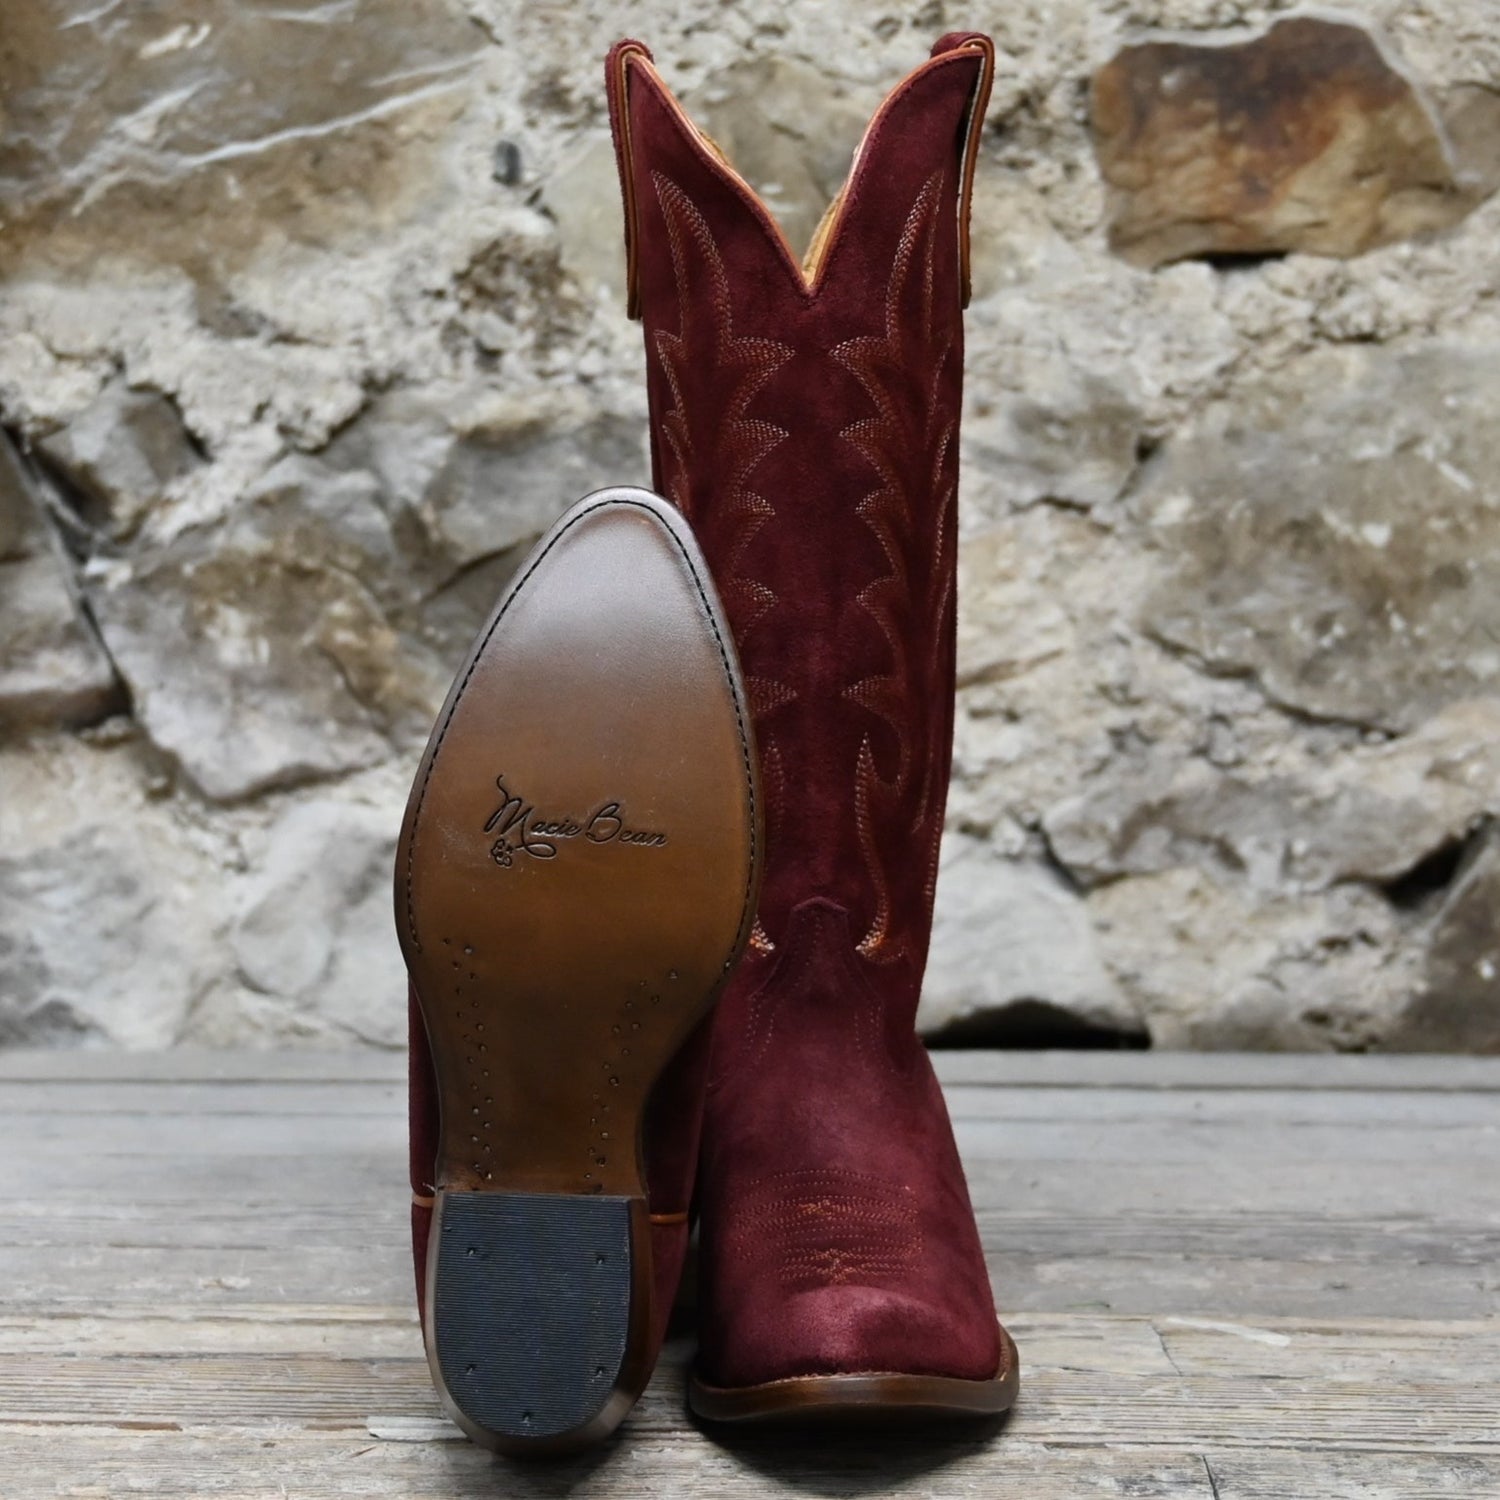 Macie Bean Cabernet Cowgirl Boots in Wine Suede view of bottom